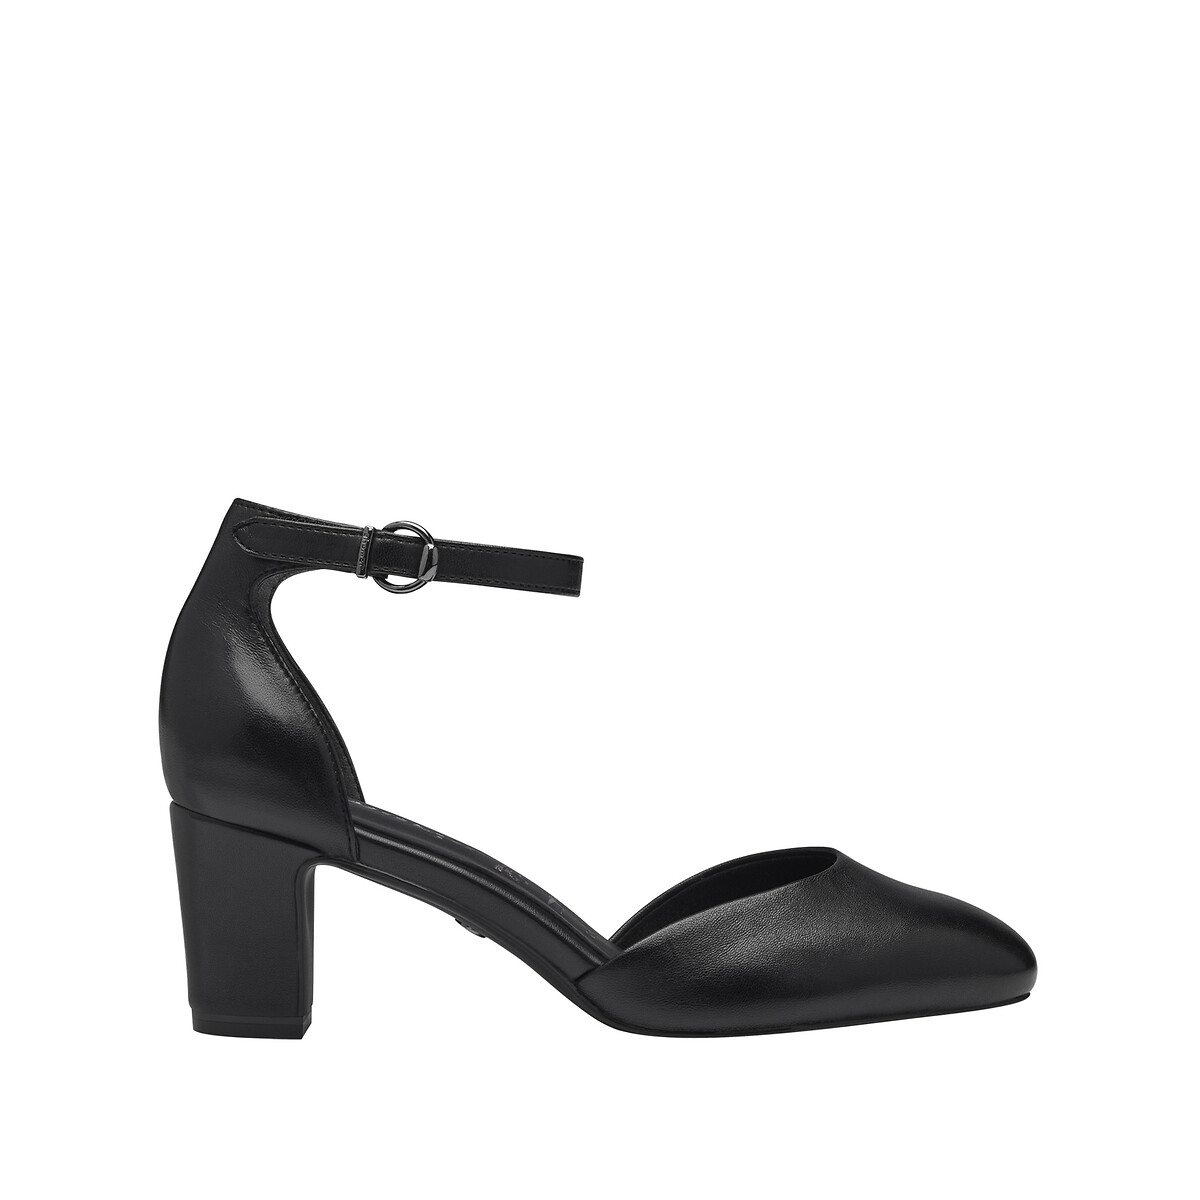 Image of Leather Ankle Strap Heels